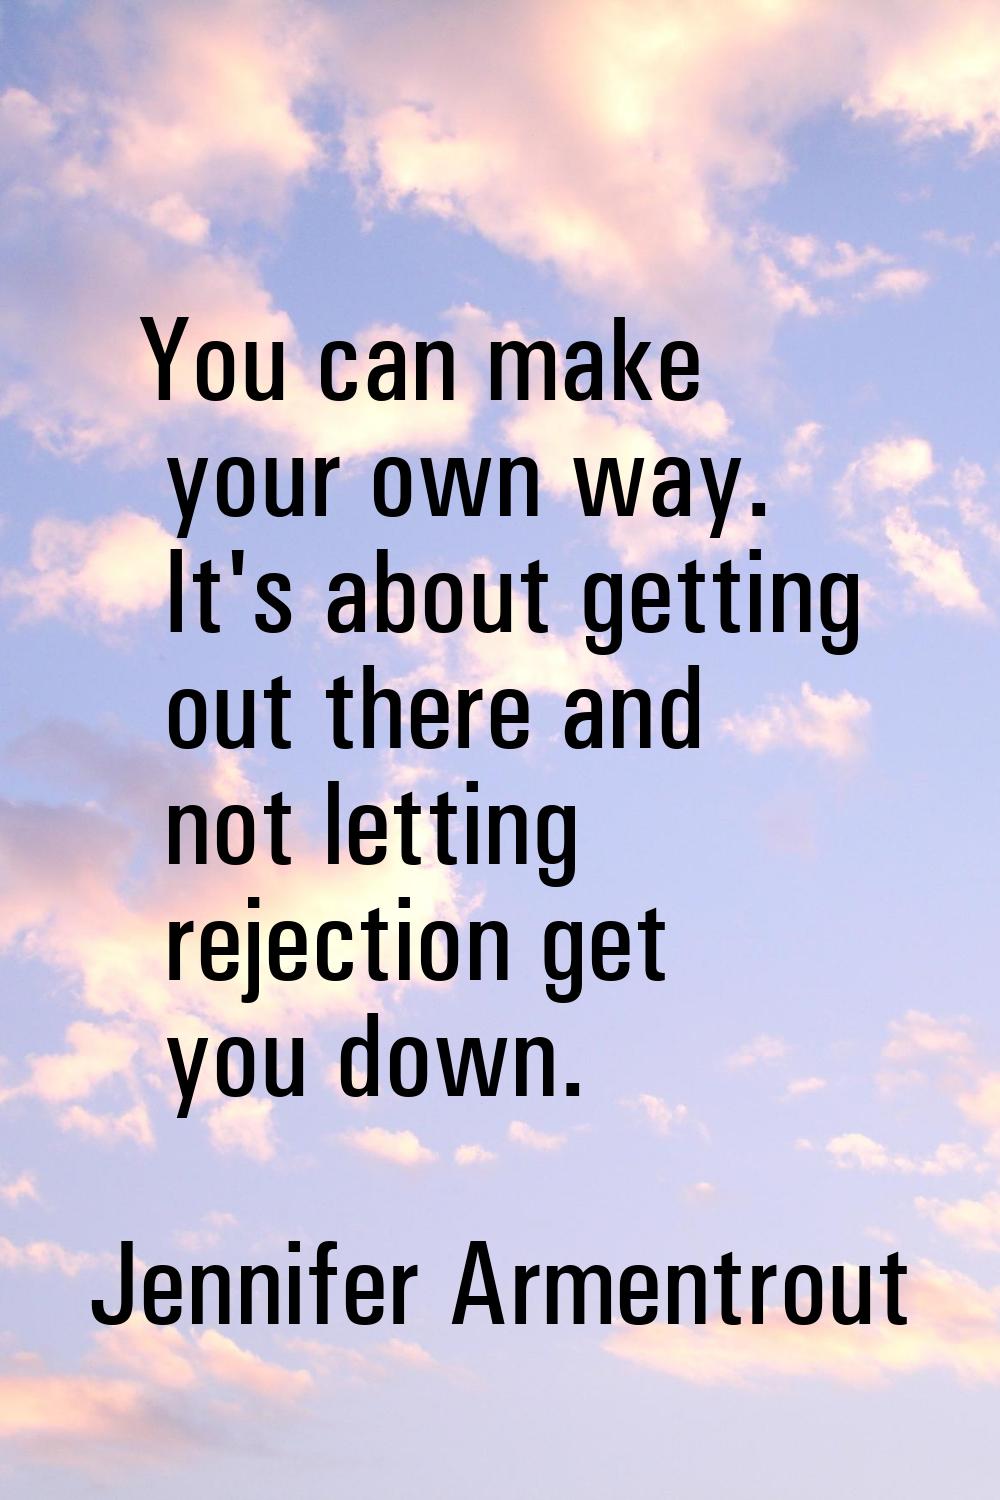 You can make your own way. It's about getting out there and not letting rejection get you down.